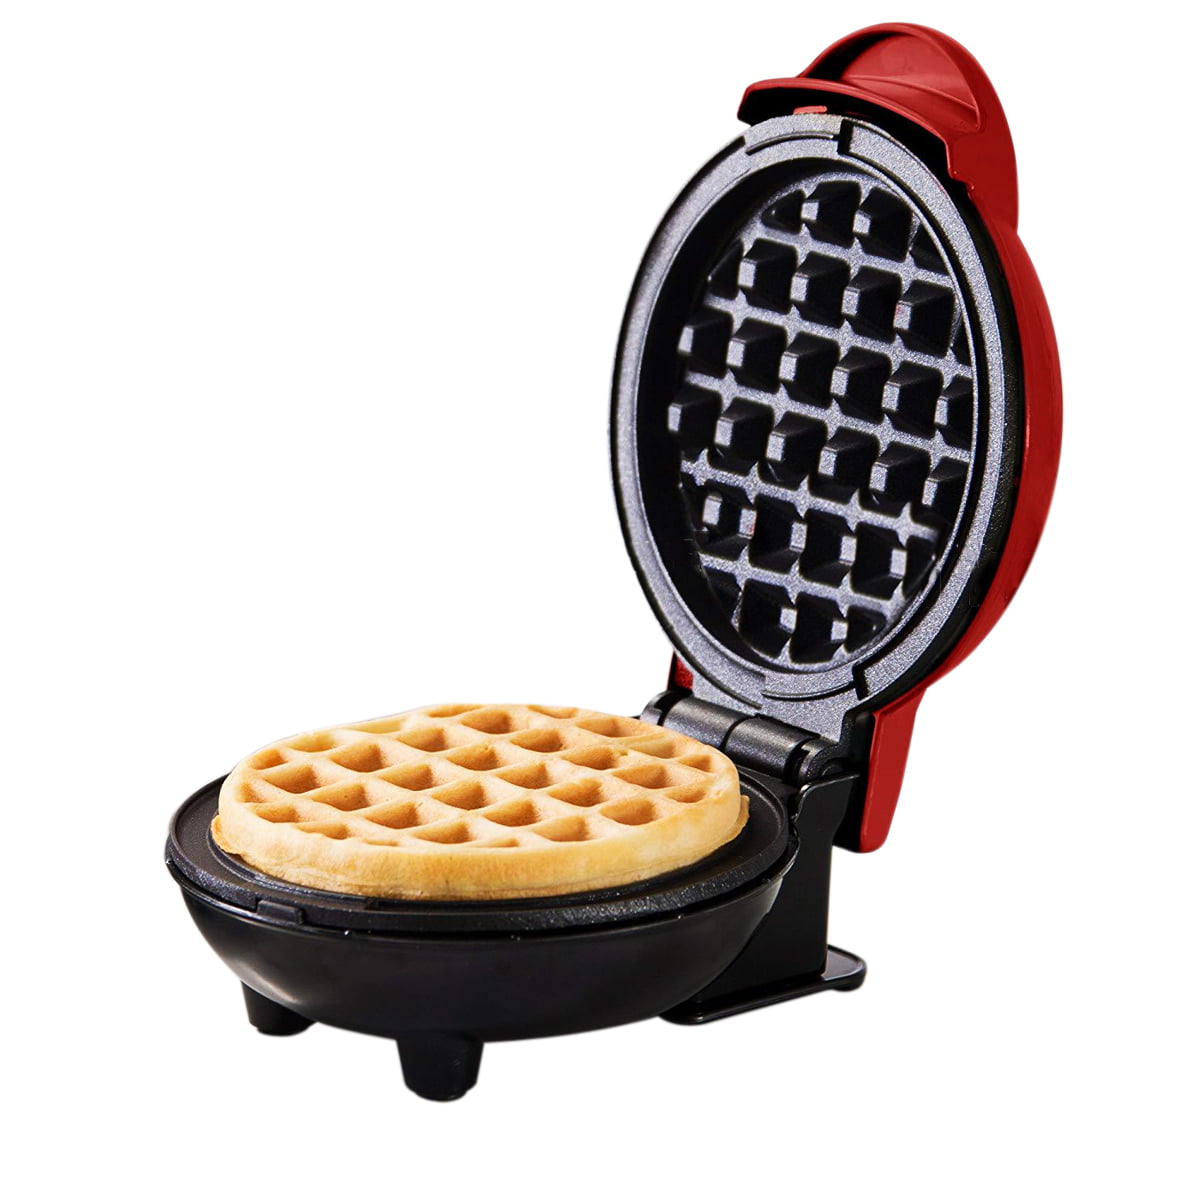 Or Snacks,Sandwichplate Hash Browns Paninis CAR SHUN Mini Waffle Maker Machine For Individual Waffles Other On The Go Breakfast Lunch 